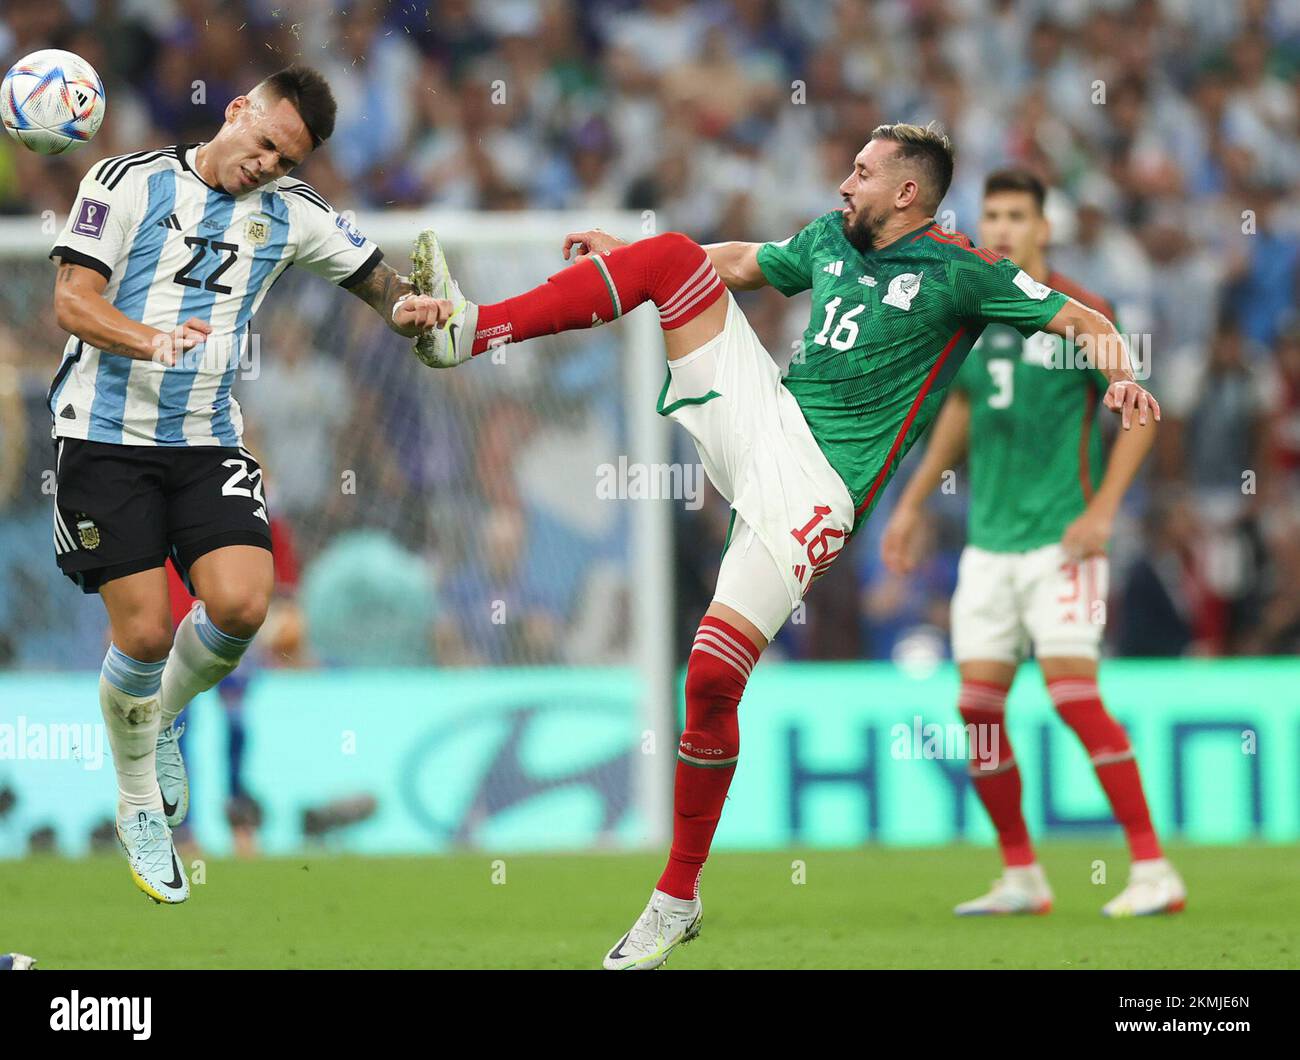 Lusail, Qatar. 26th Nov, 2022. Hector Herrera (C) of Mexico vies with Lautaro Martinez (L) of Argentina during the Group C match between Argentina and Mexico at the 2022 FIFA World Cup at Lusail Stadium in Lusail, Qatar, Nov. 26, 2022. Credit: Pan Yulong/Xinhua/Alamy Live News Stock Photo